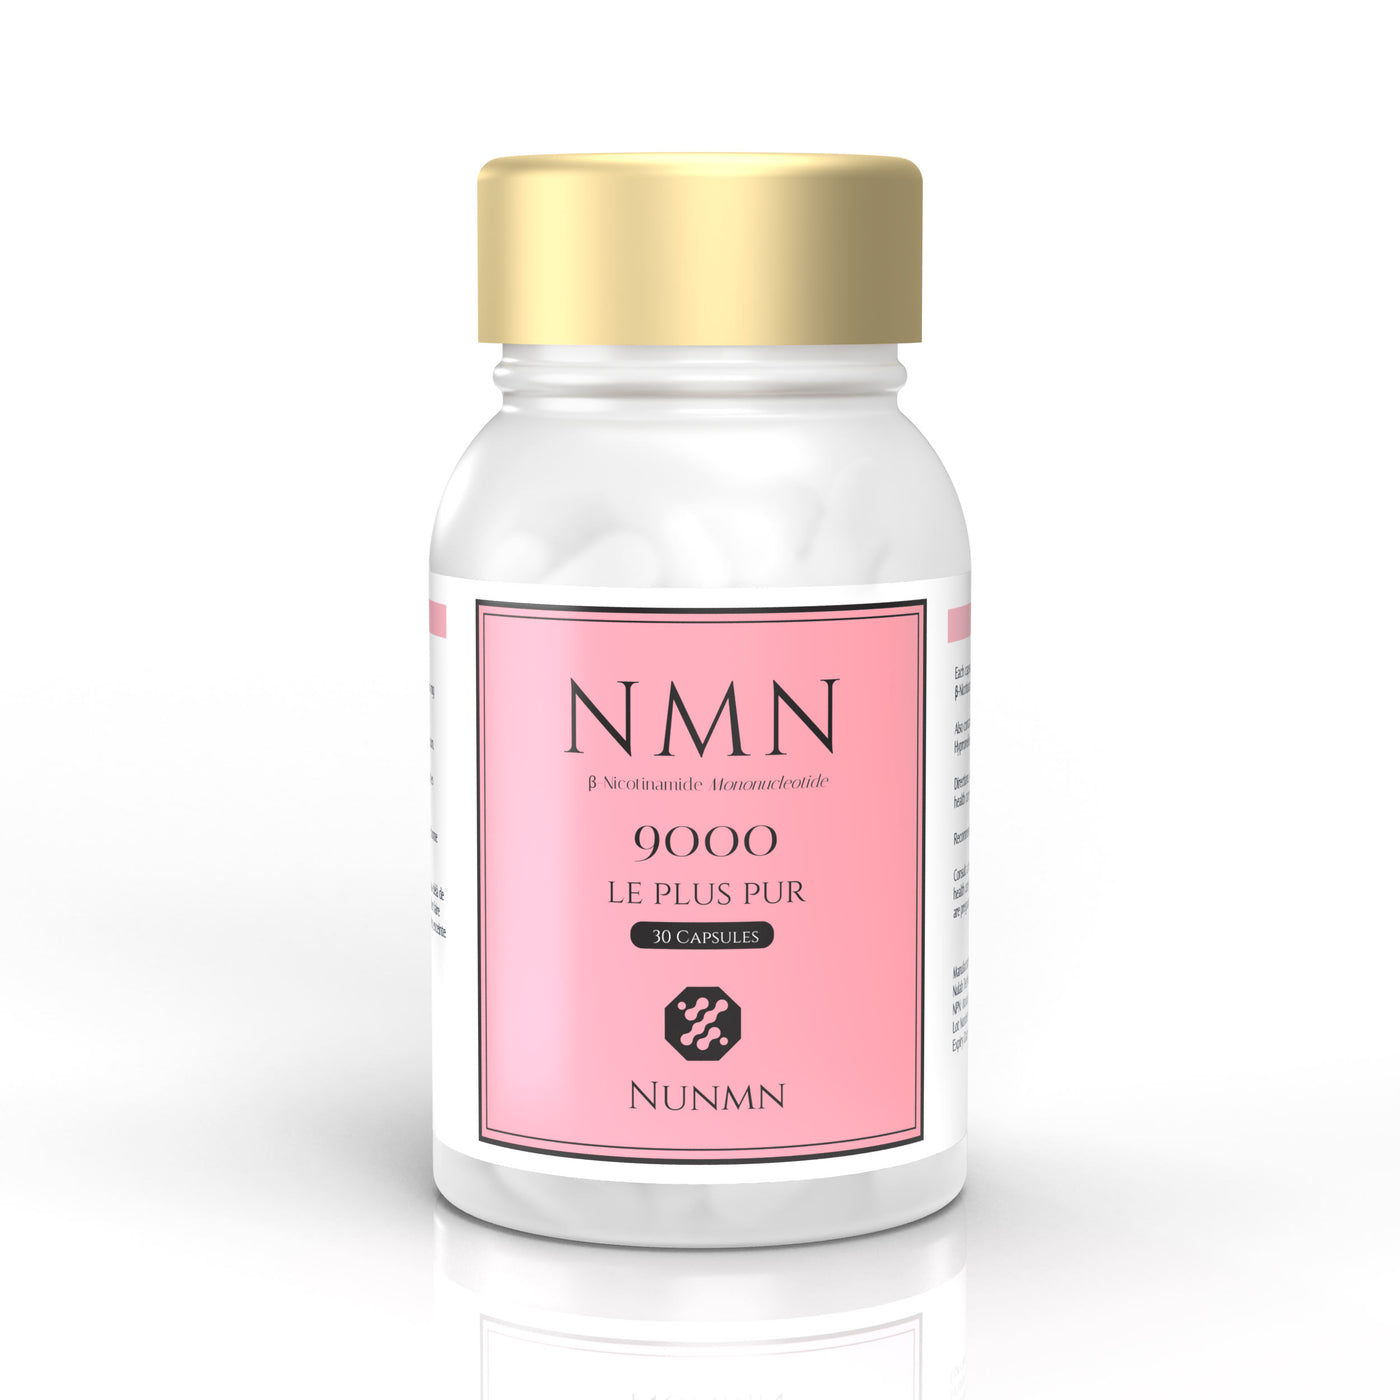 NMN Supplement 9000 NAD+ Booster Nicotinamide Mononucleotide Energy Booster Metabolism & Repair DNA. Vitality, Healthy Aging 99.5% Purity 1 bottle